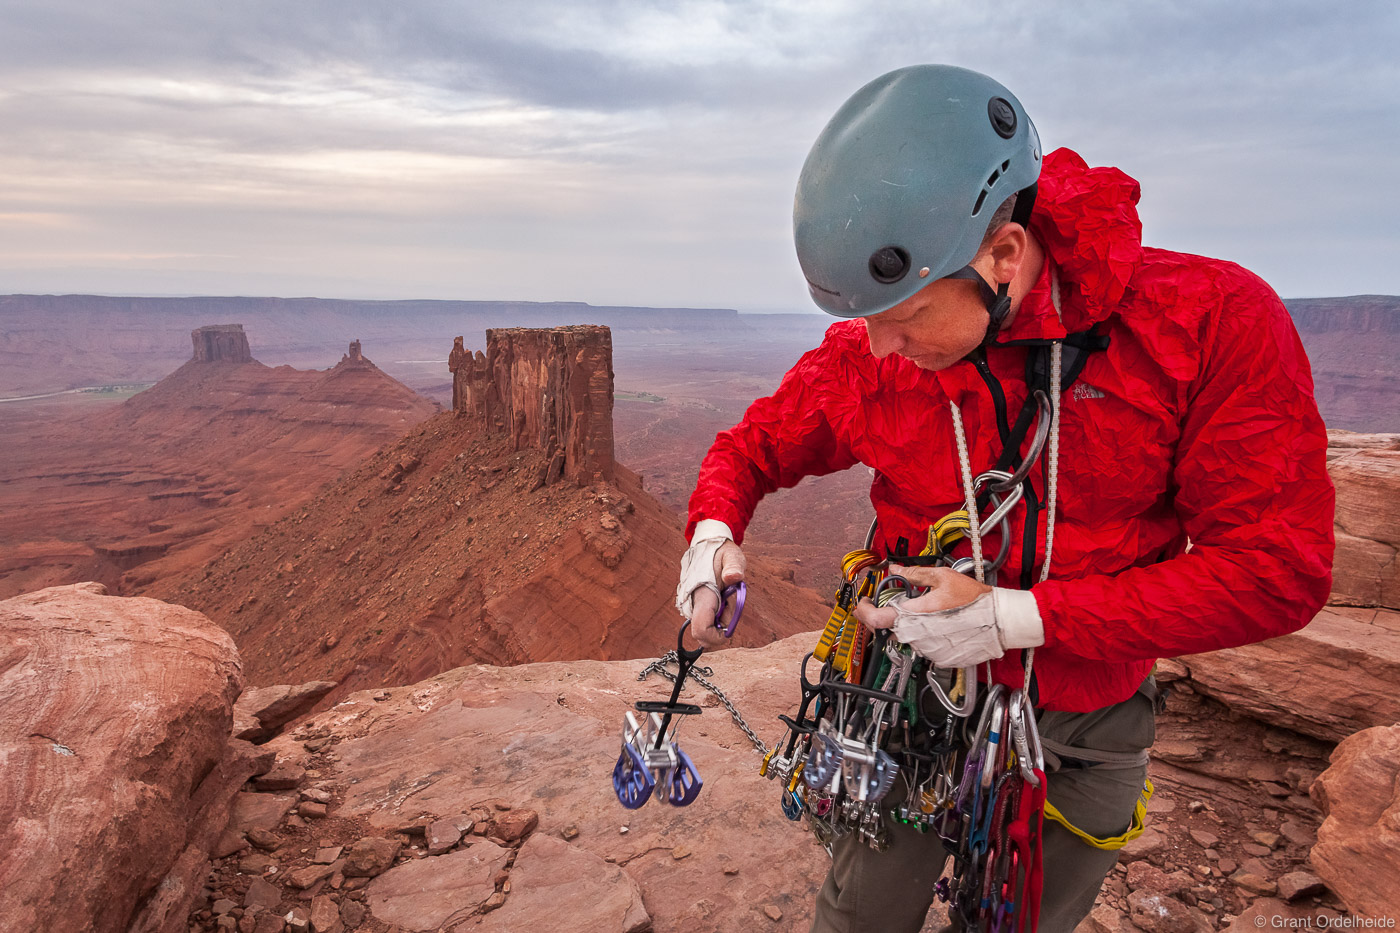 A climber racking up his cams after climbing the North Chimney (5.8) on Utah's Castleton Tower.